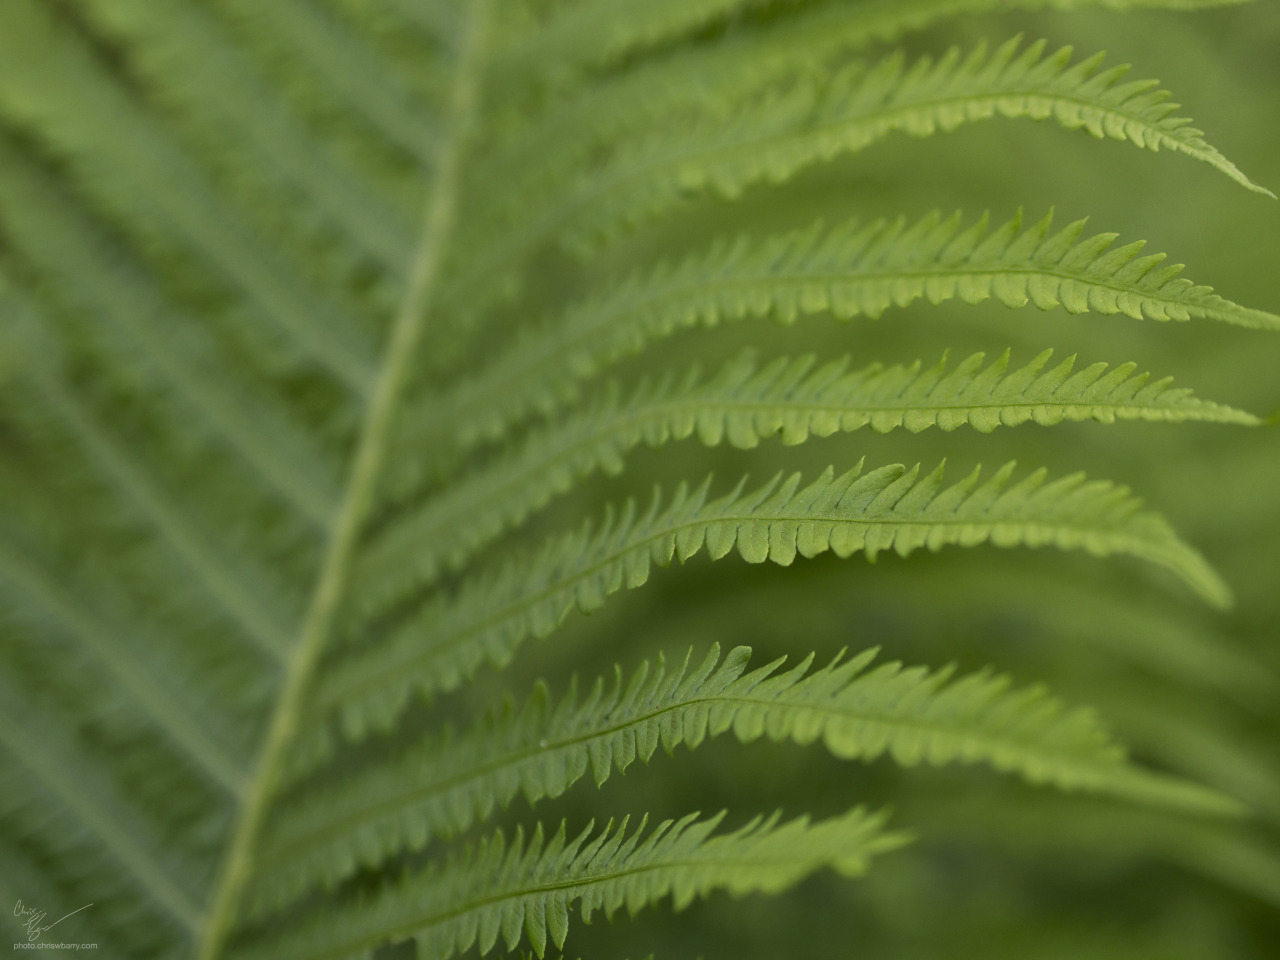 And last one of a fern